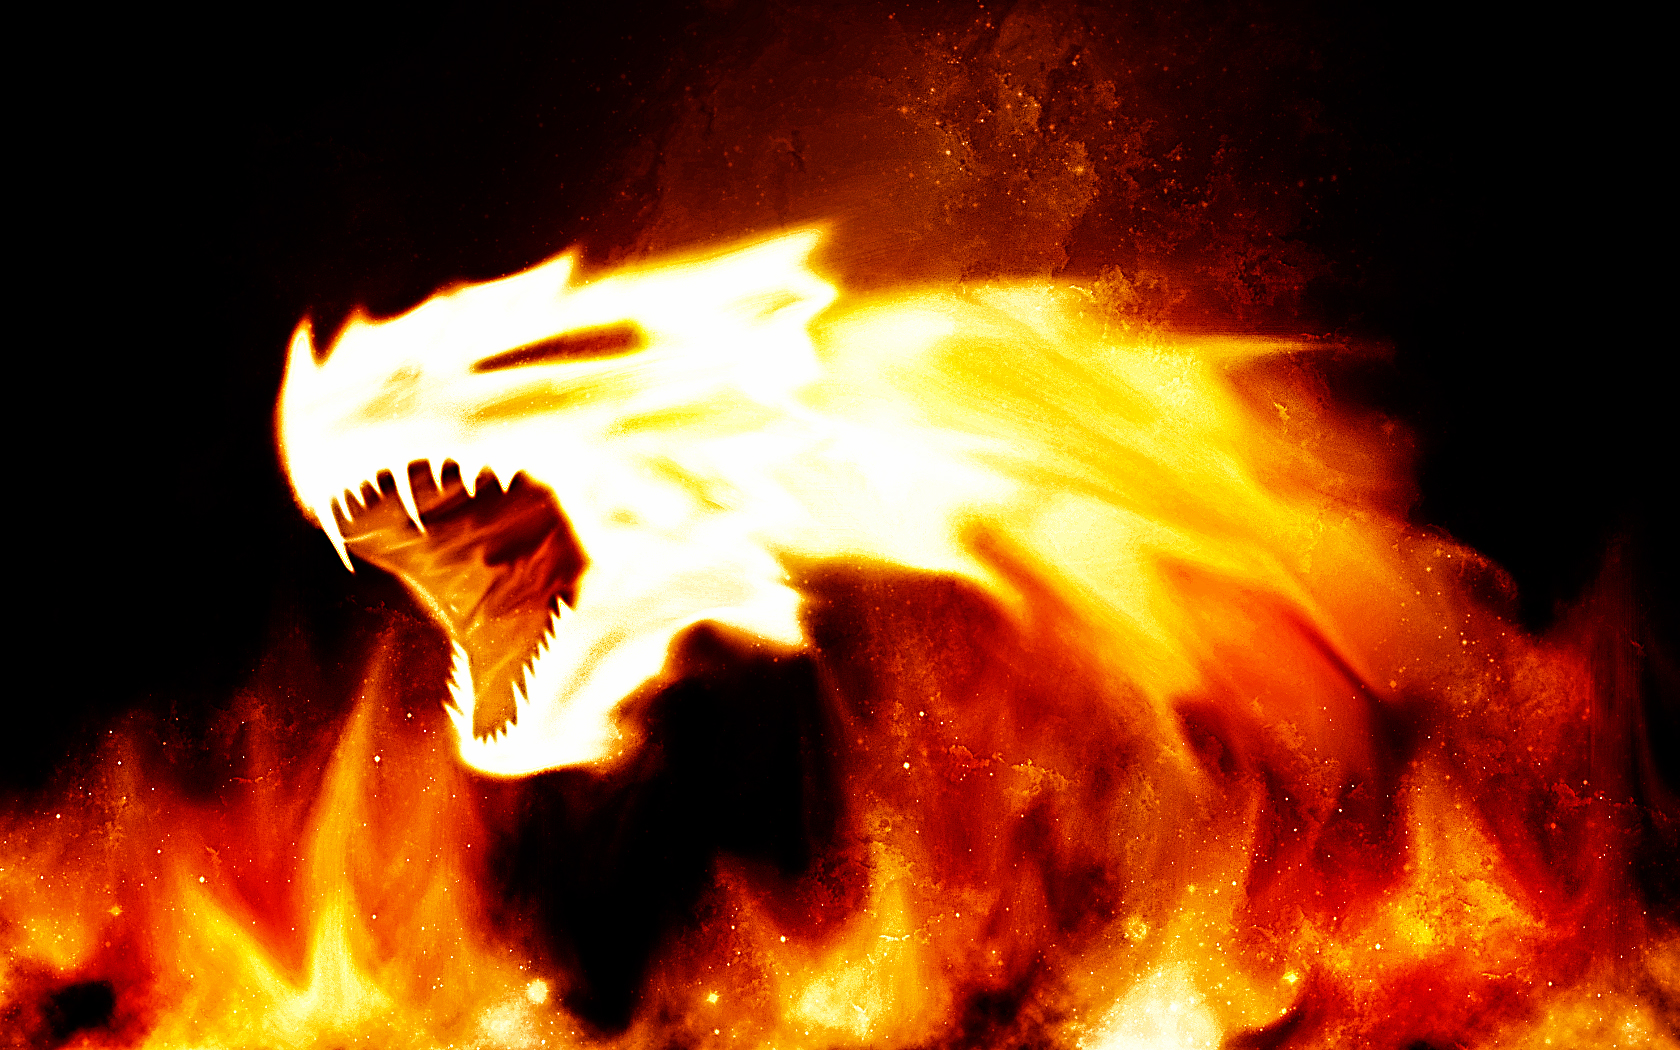 Free Download Fire Dragon Background Wallpaper Fire Dragon Background Hd Wallpaper 1680x1050 For Your Desktop Mobile Tablet Explore 77 Cool Fire Wallpapers Free Fire Wallpaper Car Wallpapers For Fire